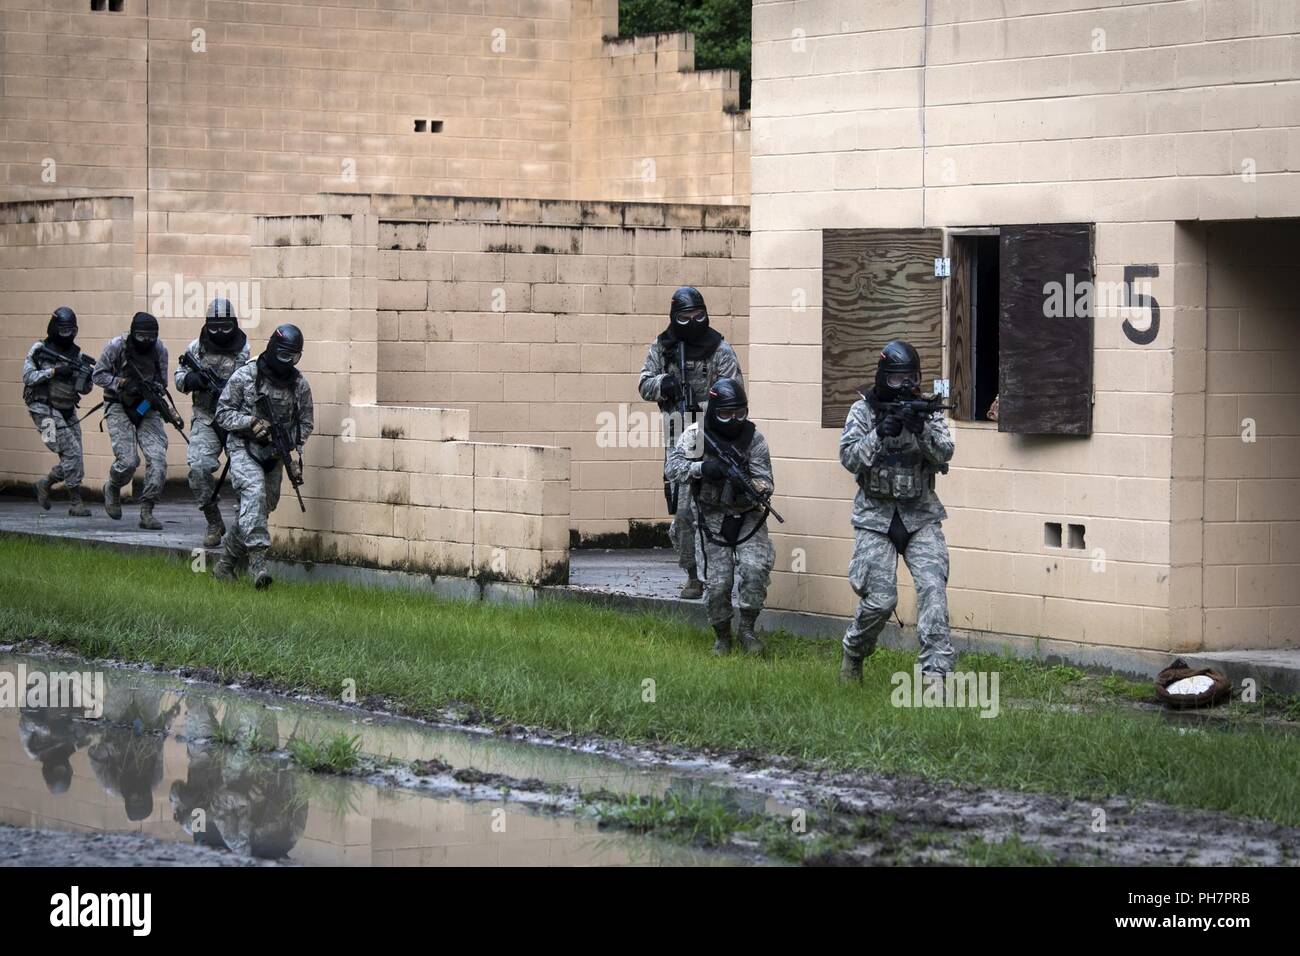 Airmen from the 23d Security Forces Squadron (SFS) run to the next building while providing cover fire during a Force on Force training scenario, June 29, 2018, at Moody Air Force Base, Ga. This training was held to ensure SFS Airmen are proficient in various tactics and procedures such as: building clear out, team movements, hostage rescue and properly applying cover fire. The scenario required Airmen to maneuver through multiple buildings to rescue a simulated victim guarded by opposing forces. Stock Photo